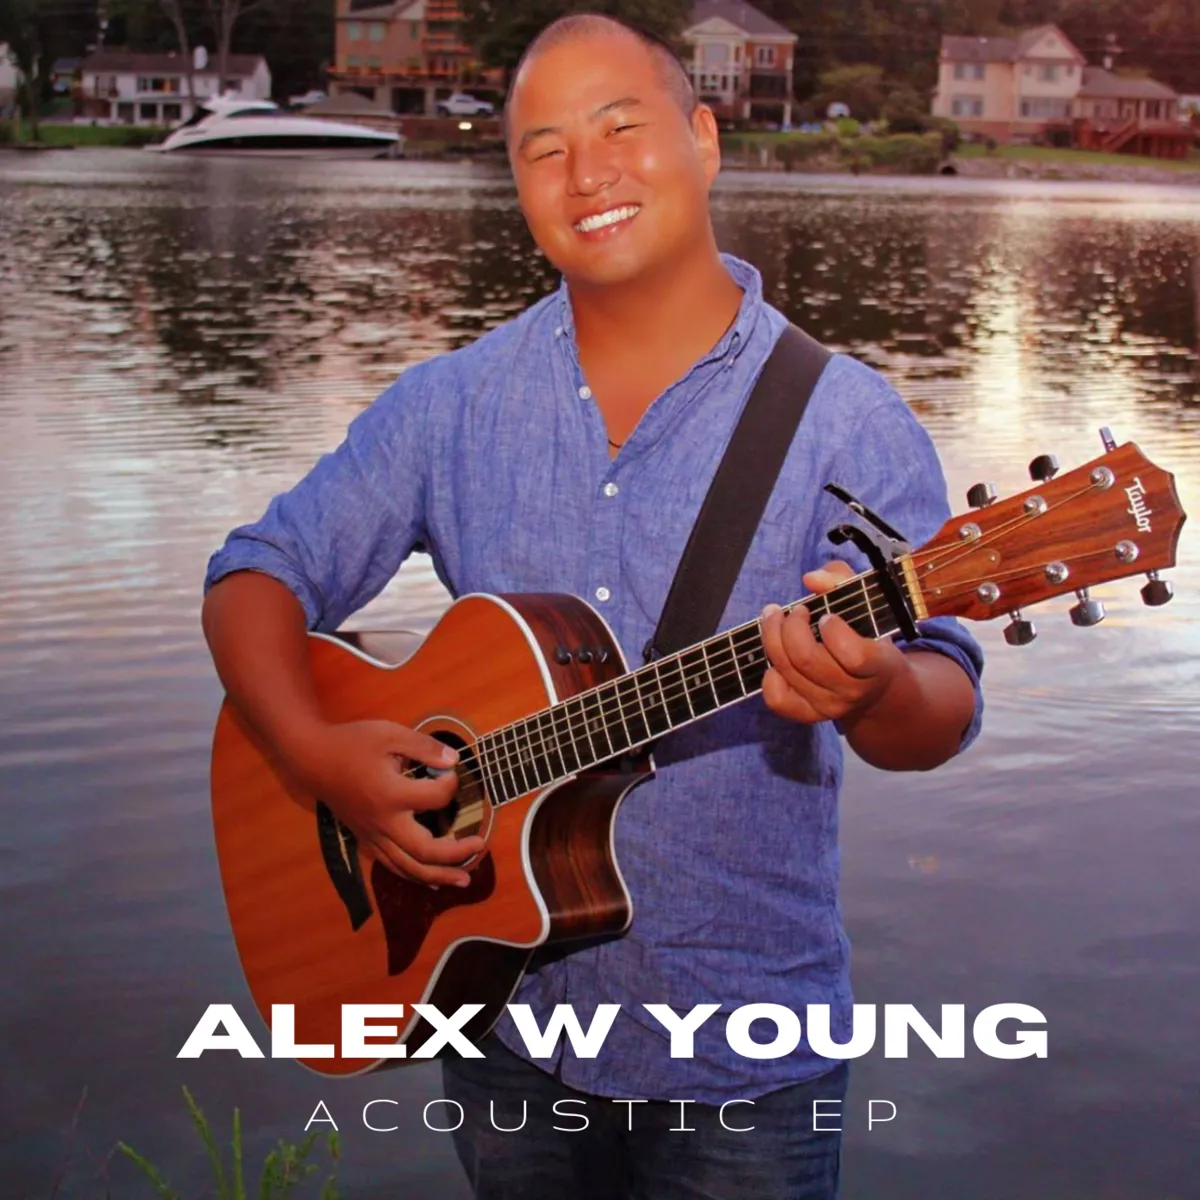 Alex W Young (Acoustic EP) - Digital Download